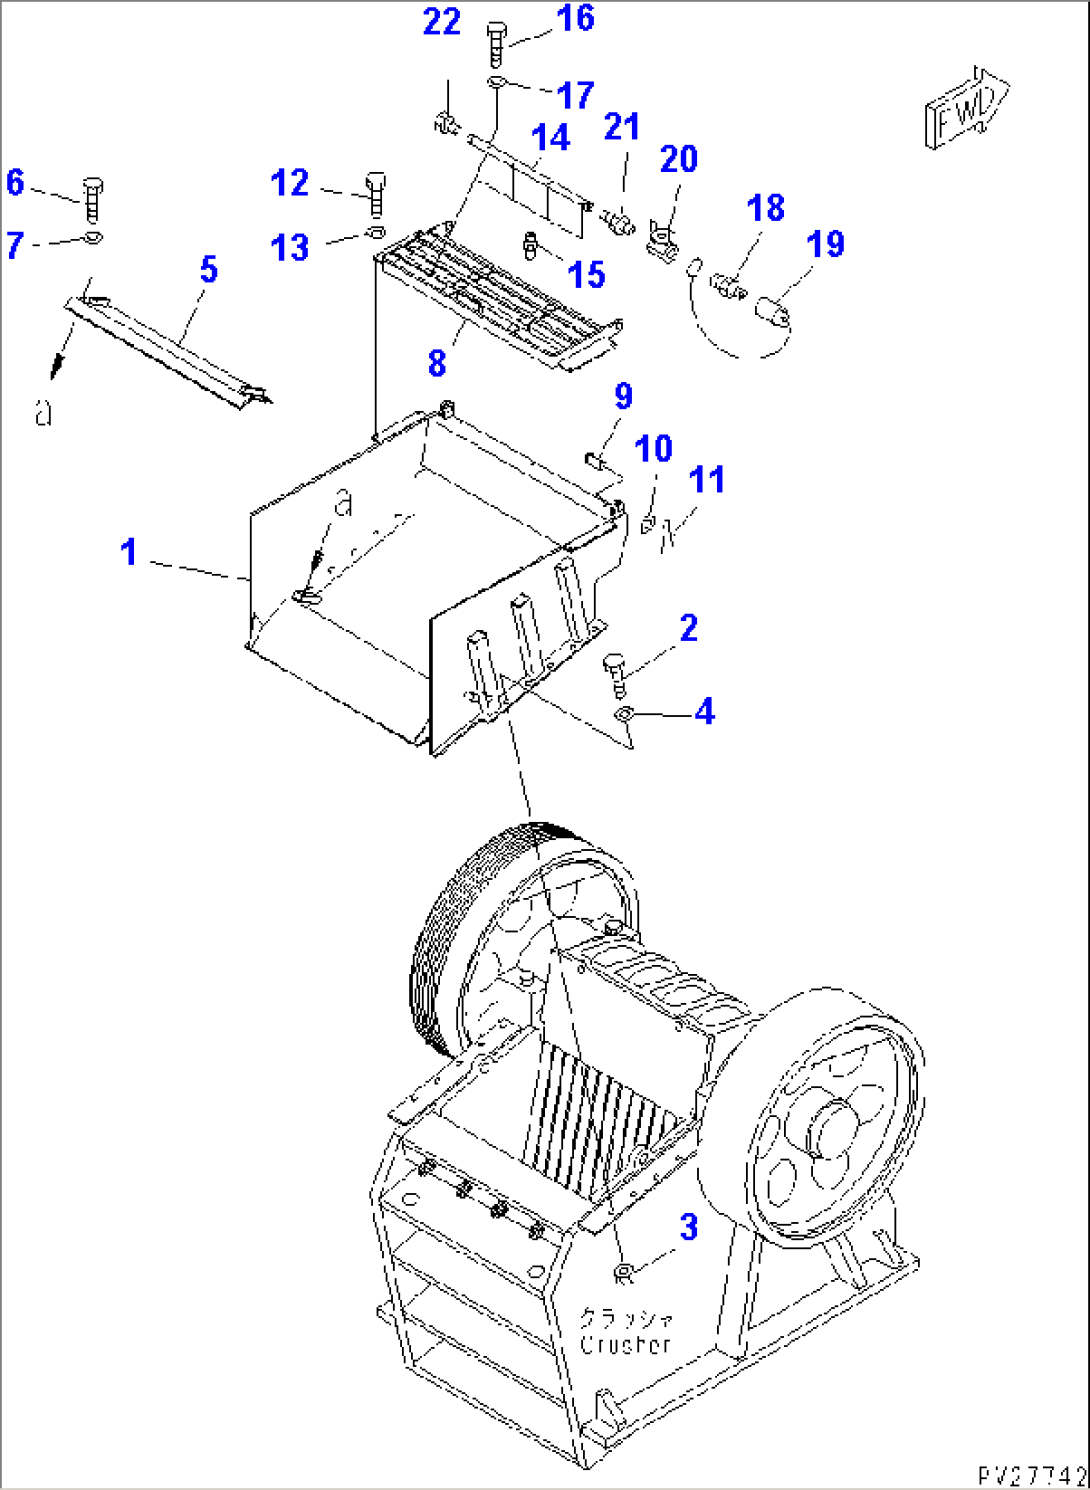 CRUSHER (GUARD AND WATER SPRINKLING NOZZLE)(#1005-1500)